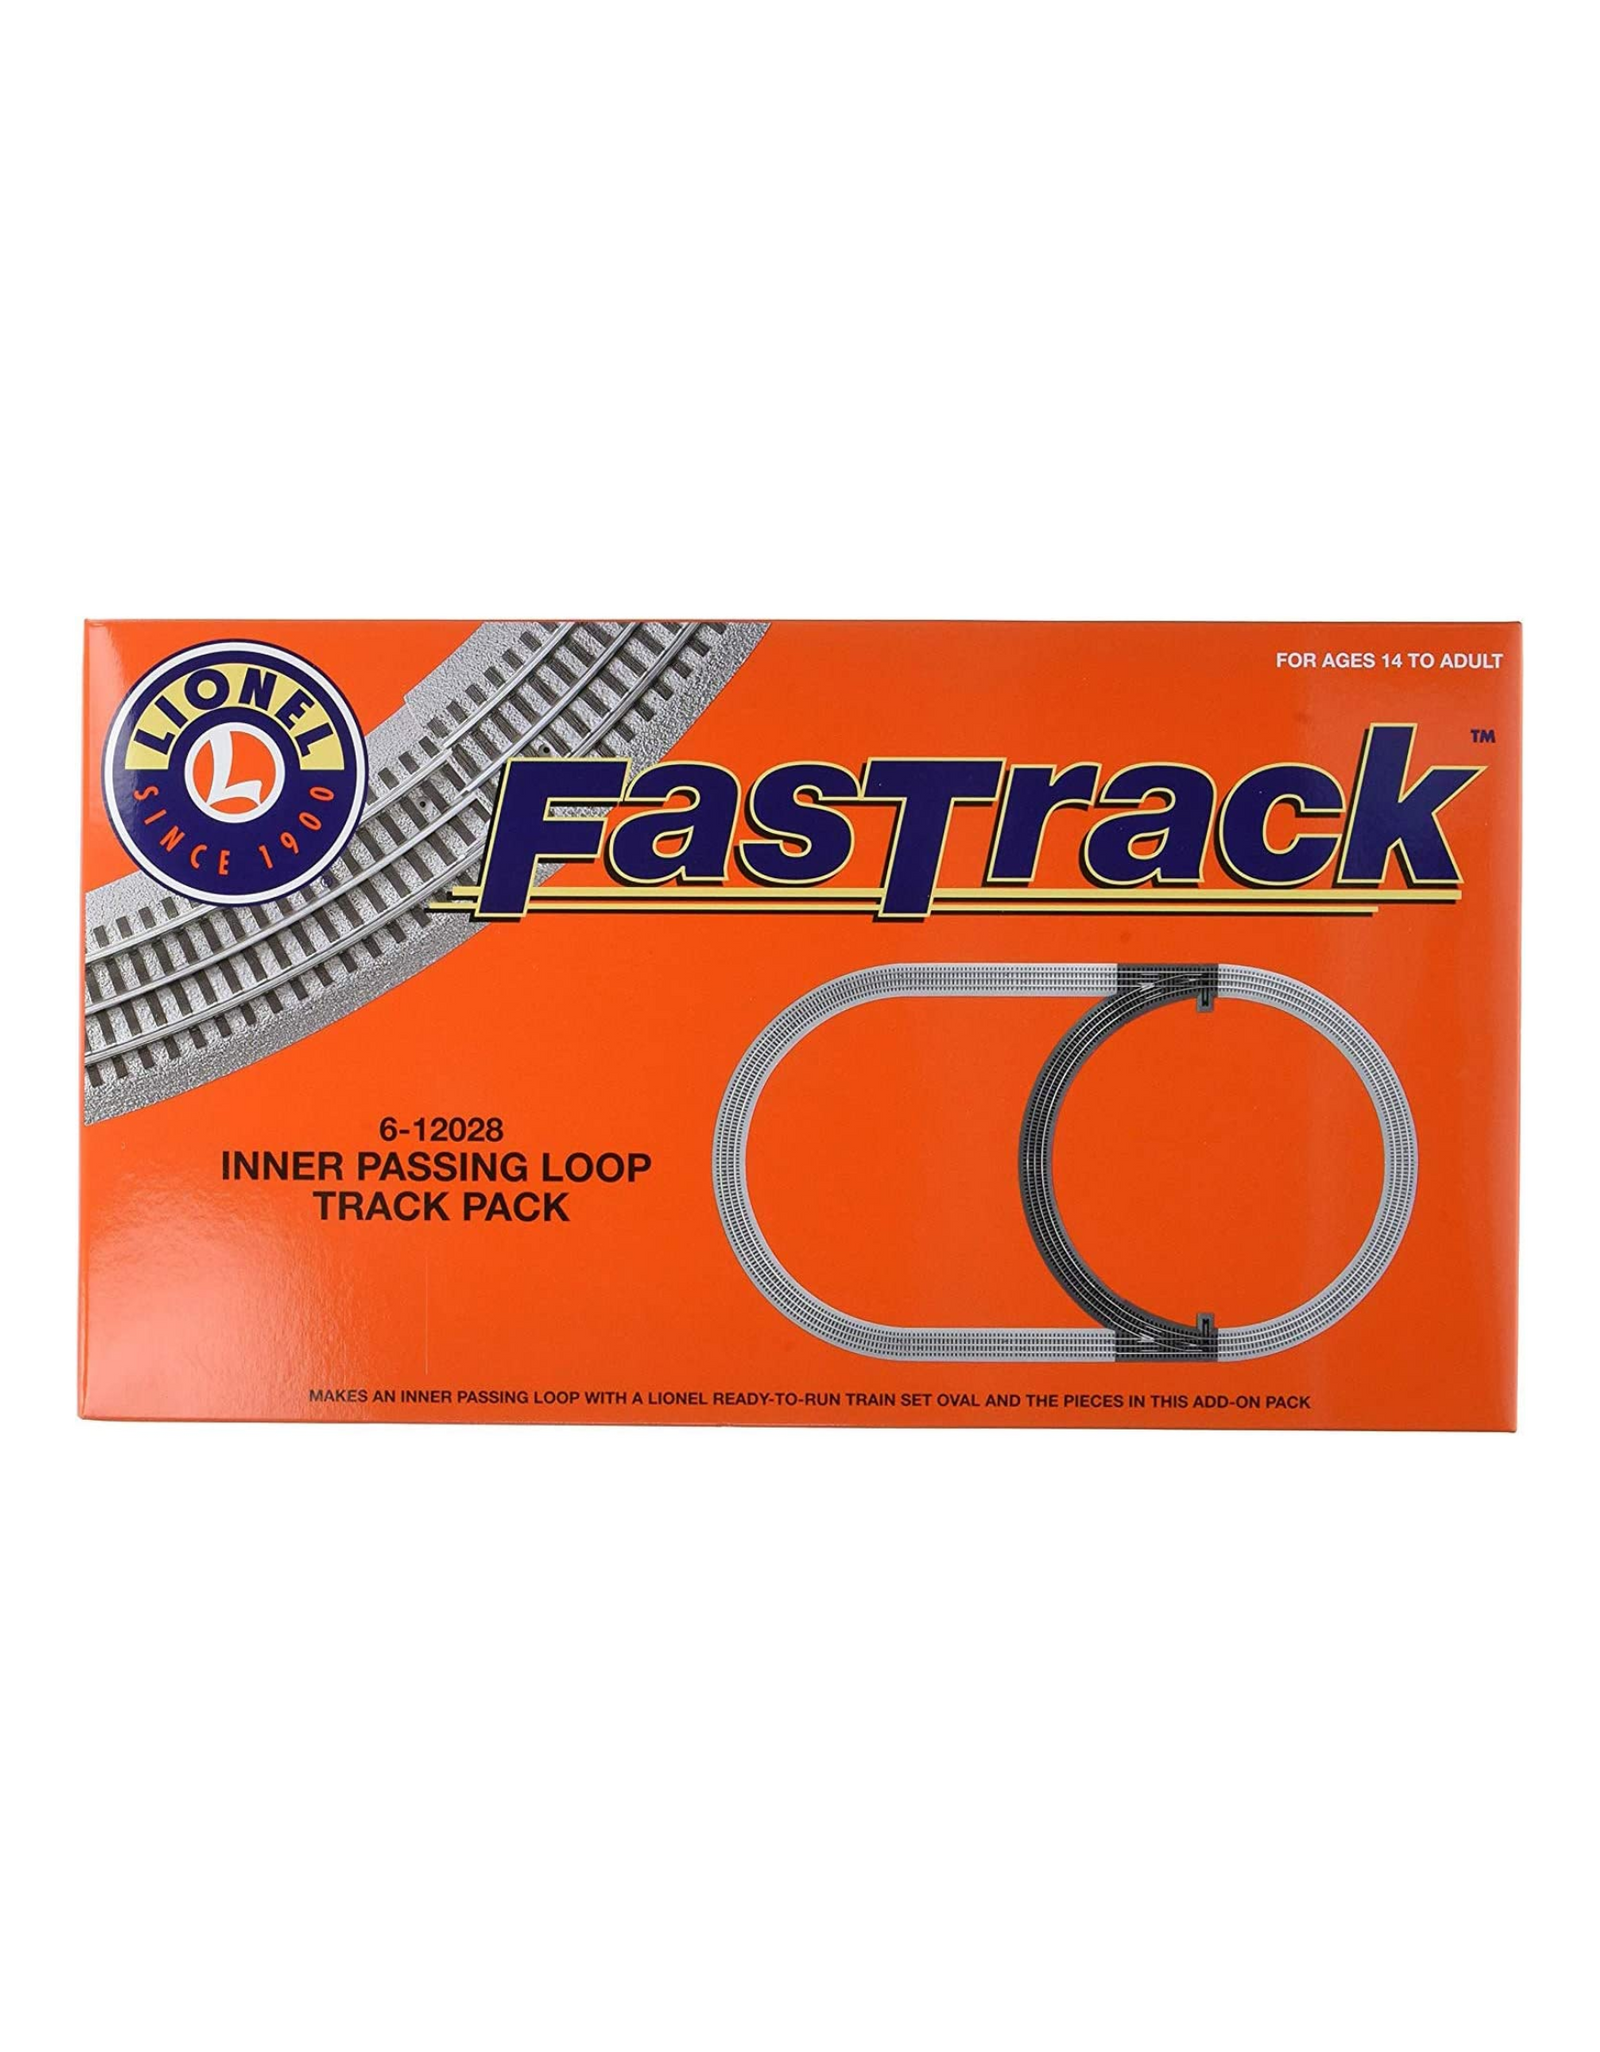 Lionel FasTrack Electric O Gauge, Inner Passing Loop Add-On Track Pack - For Ages 14 To Adult